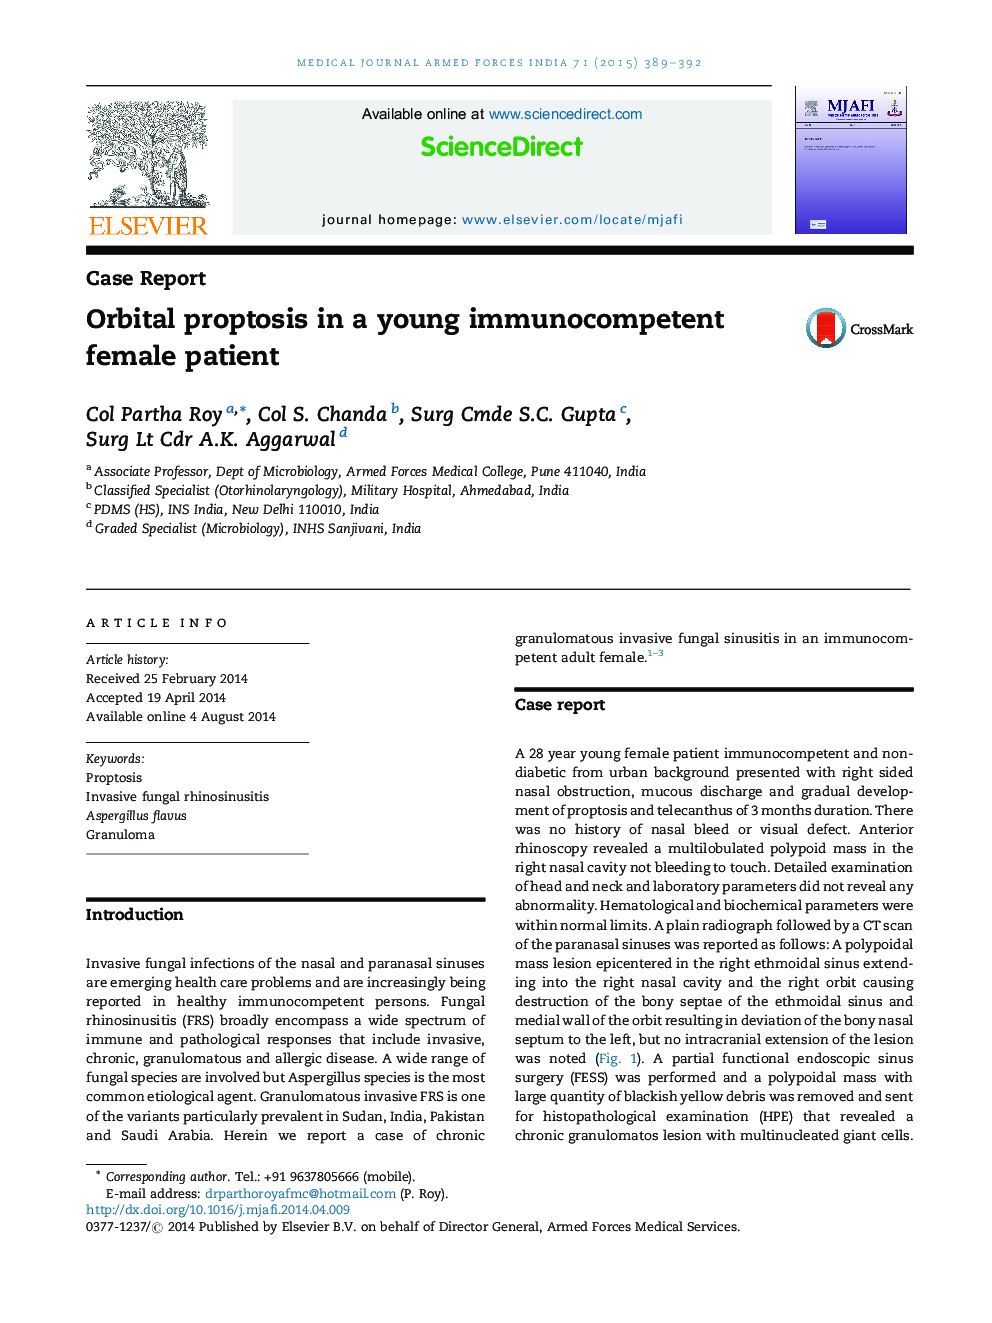 Orbital proptosis in a young immunocompetent female patient